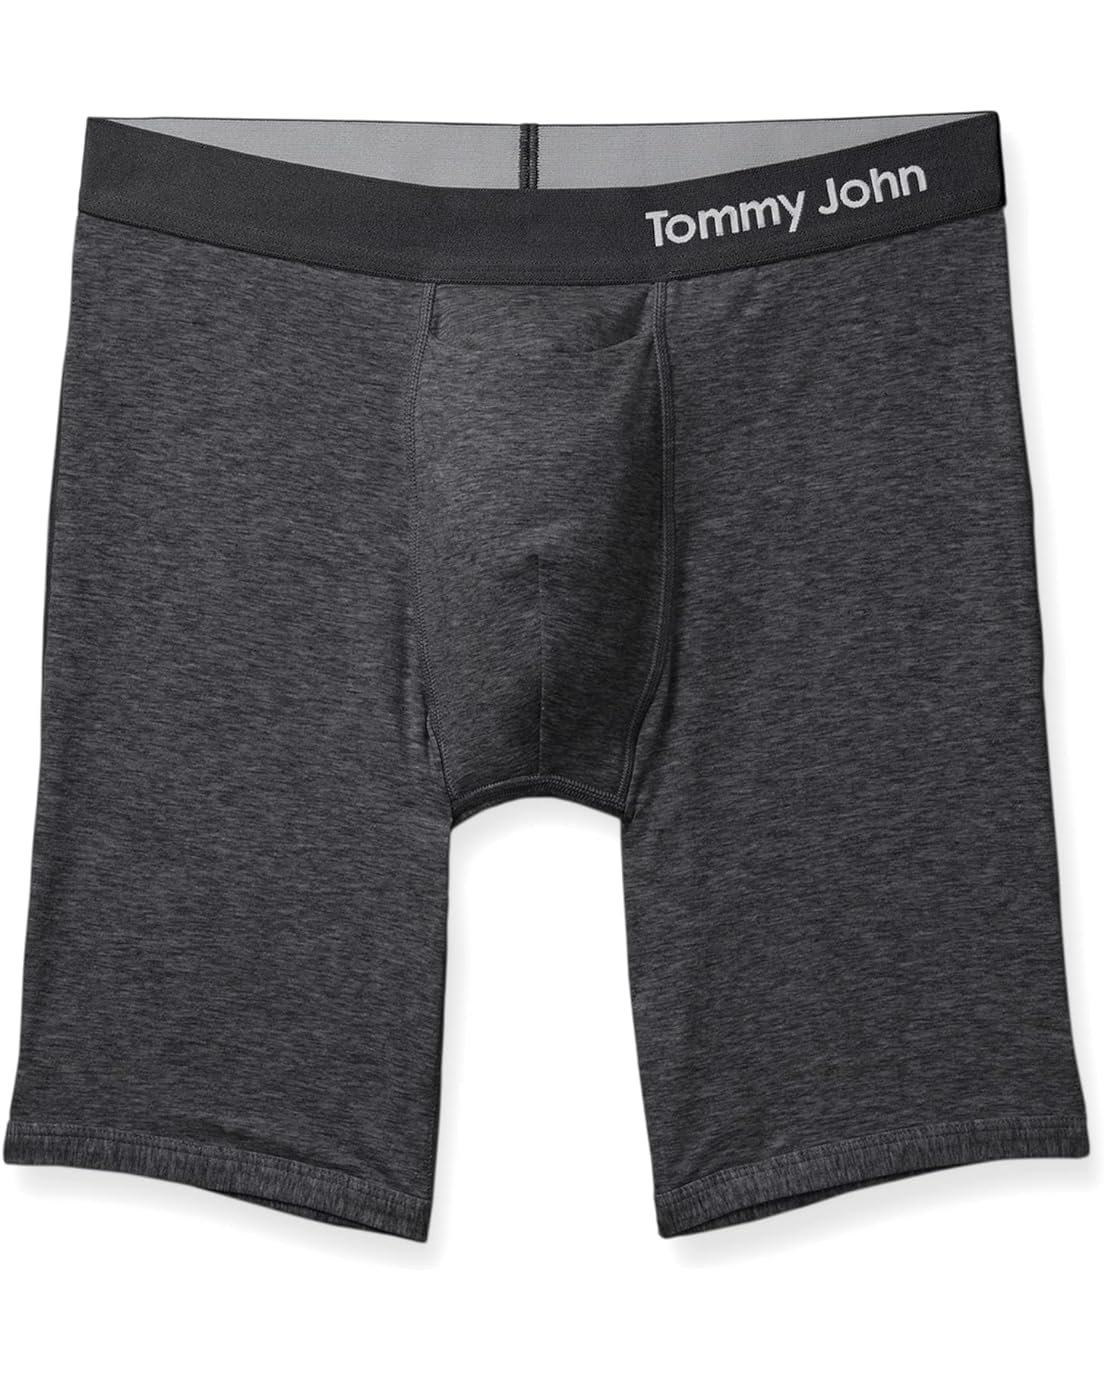  Tommy John Cool Cotton Boxer Brief 8